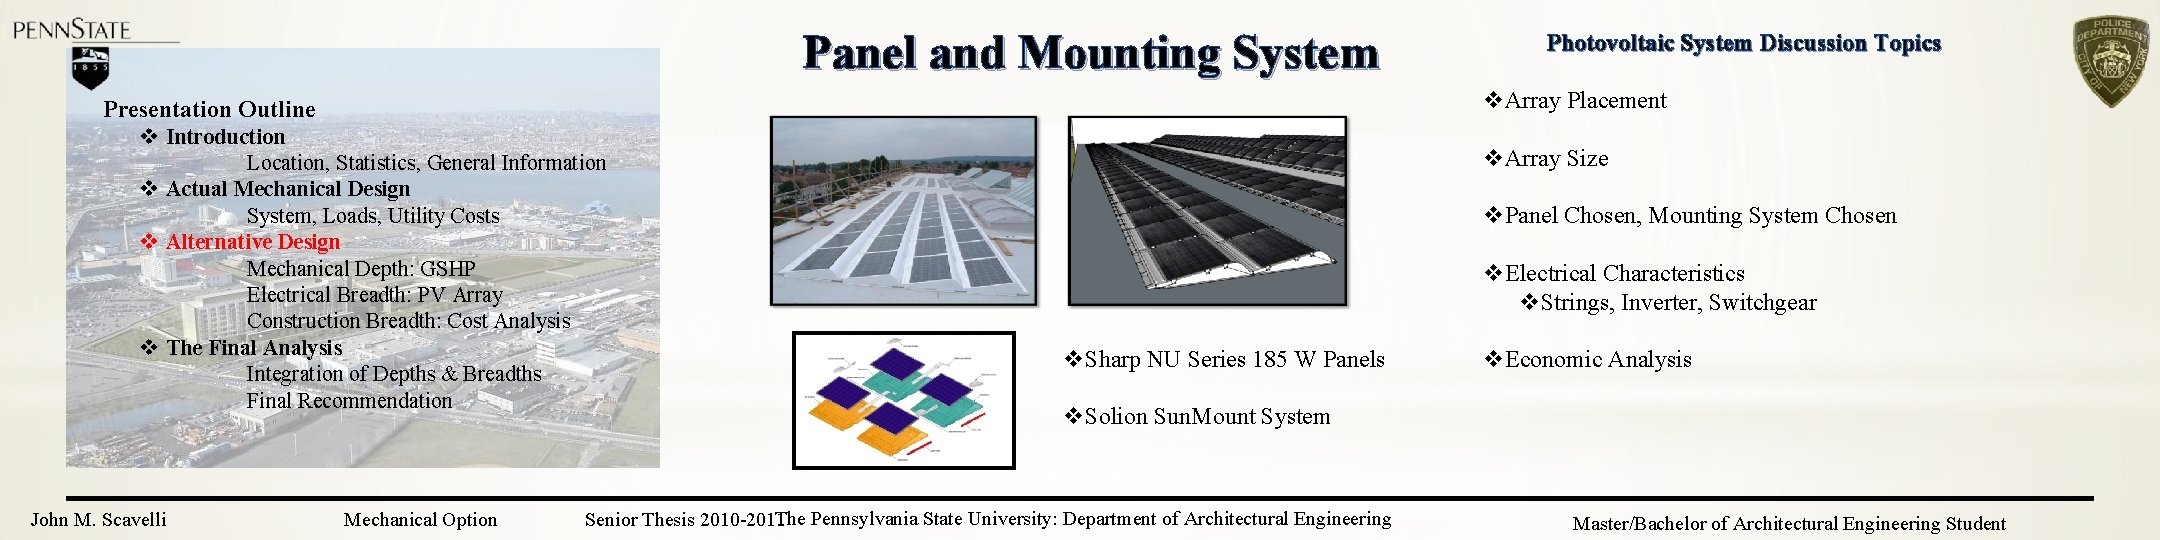 Panel and Mounting System v. Array Placement Presentation Outline v Introduction Location, Statistics, General